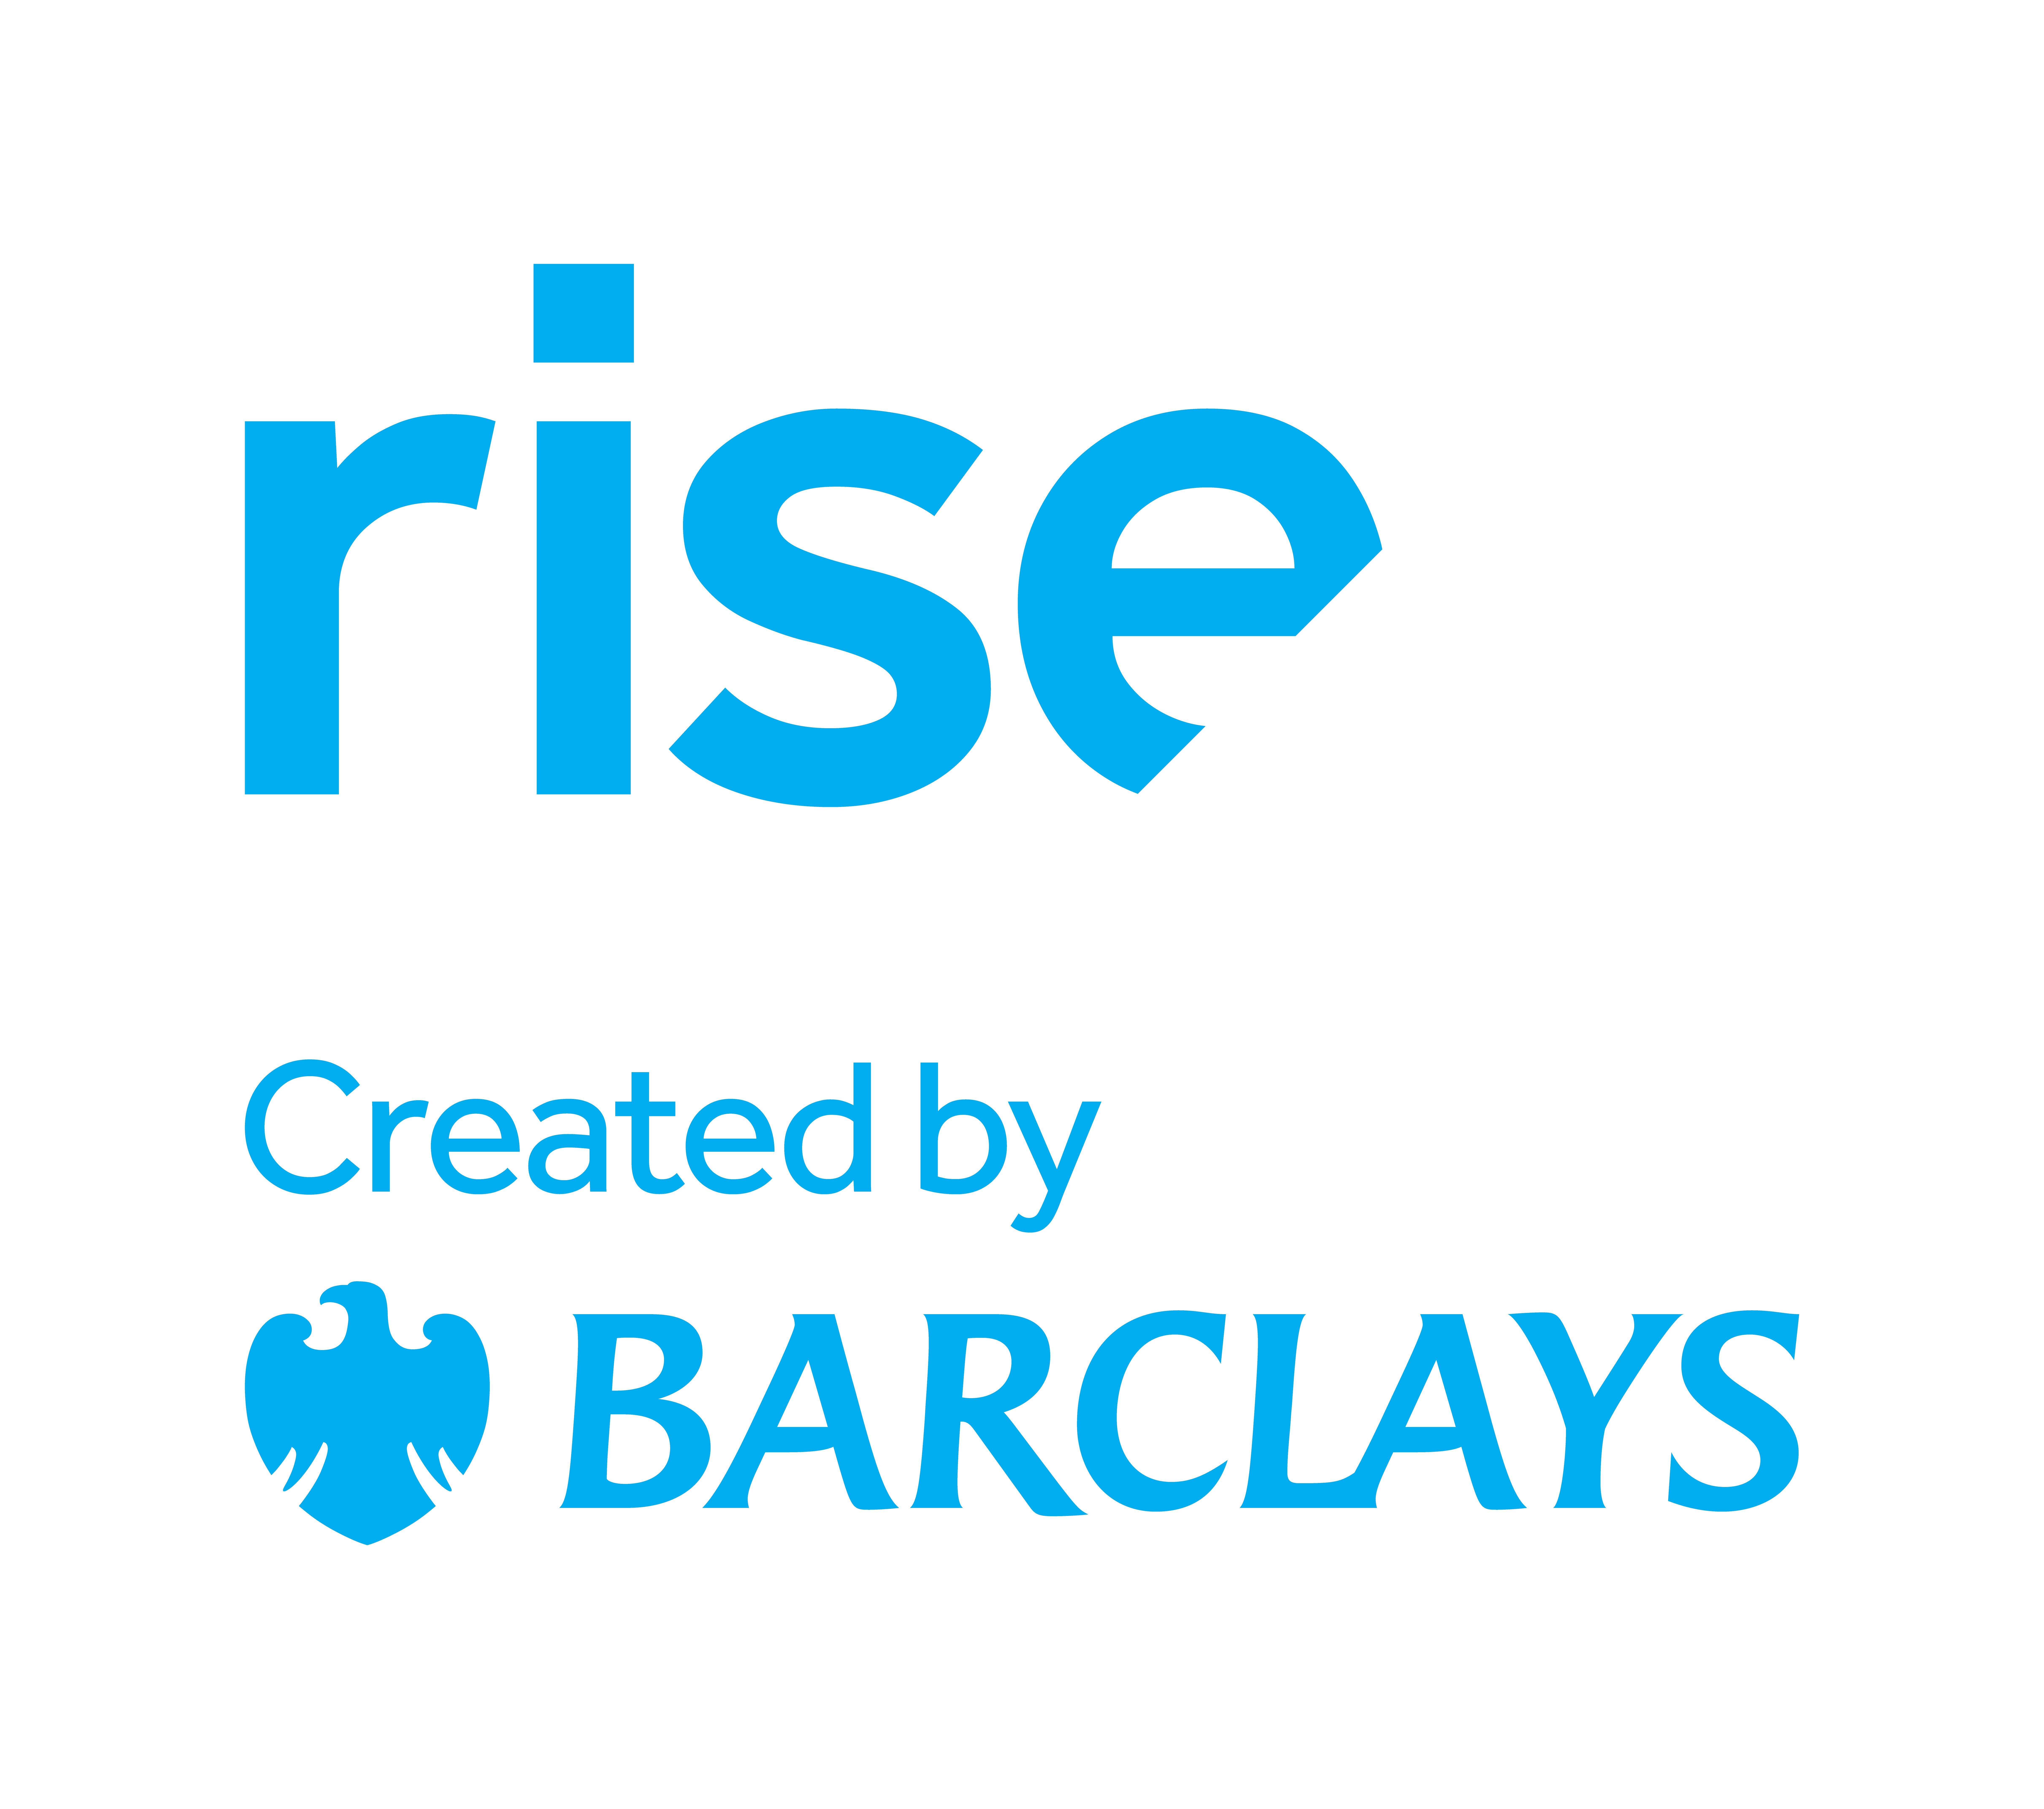 Rise, created by Barclays